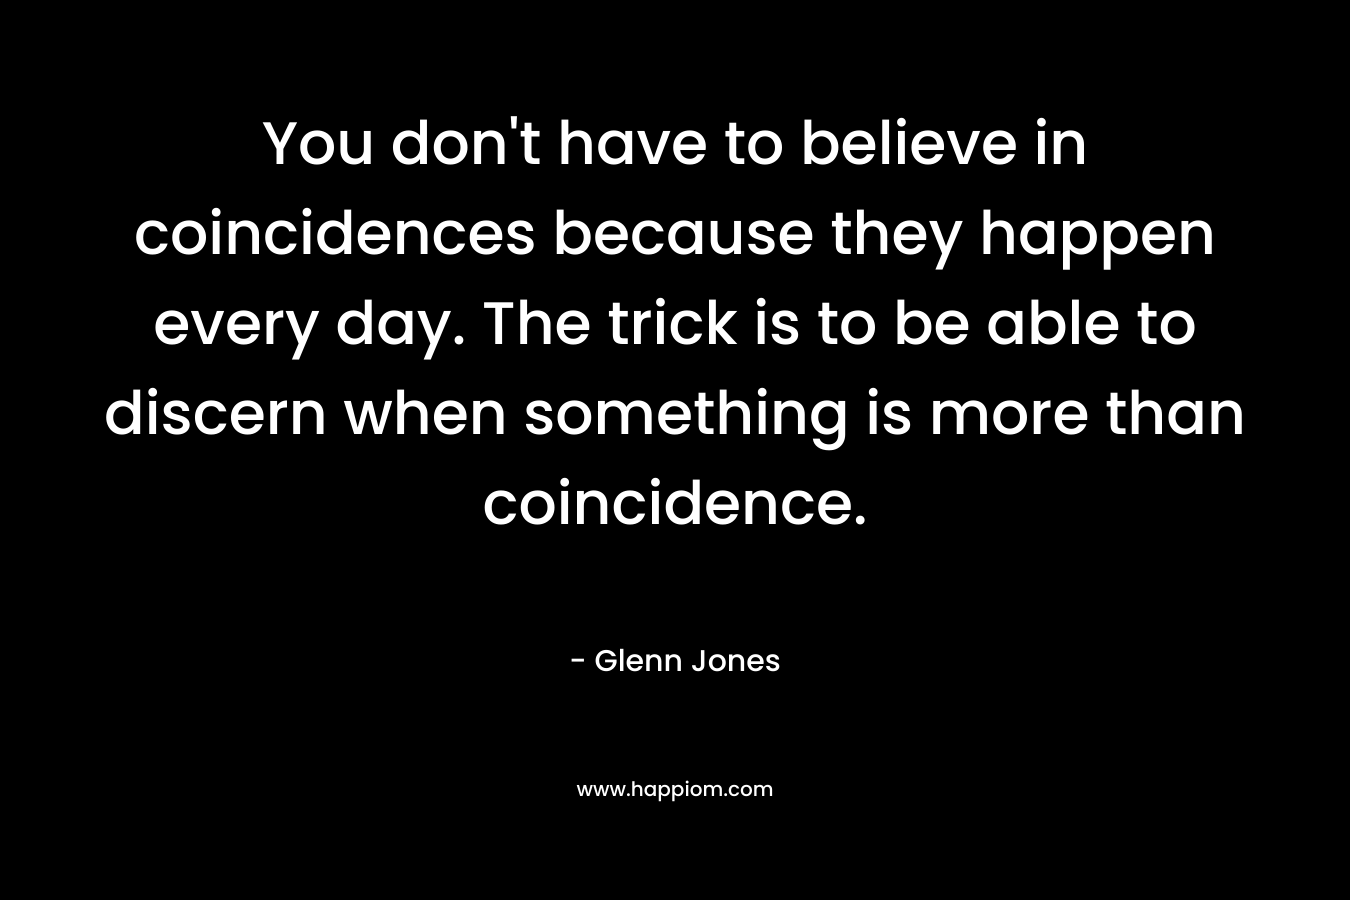 You don’t have to believe in coincidences because they happen every day. The trick is to be able to discern when something is more than coincidence. – Glenn Jones